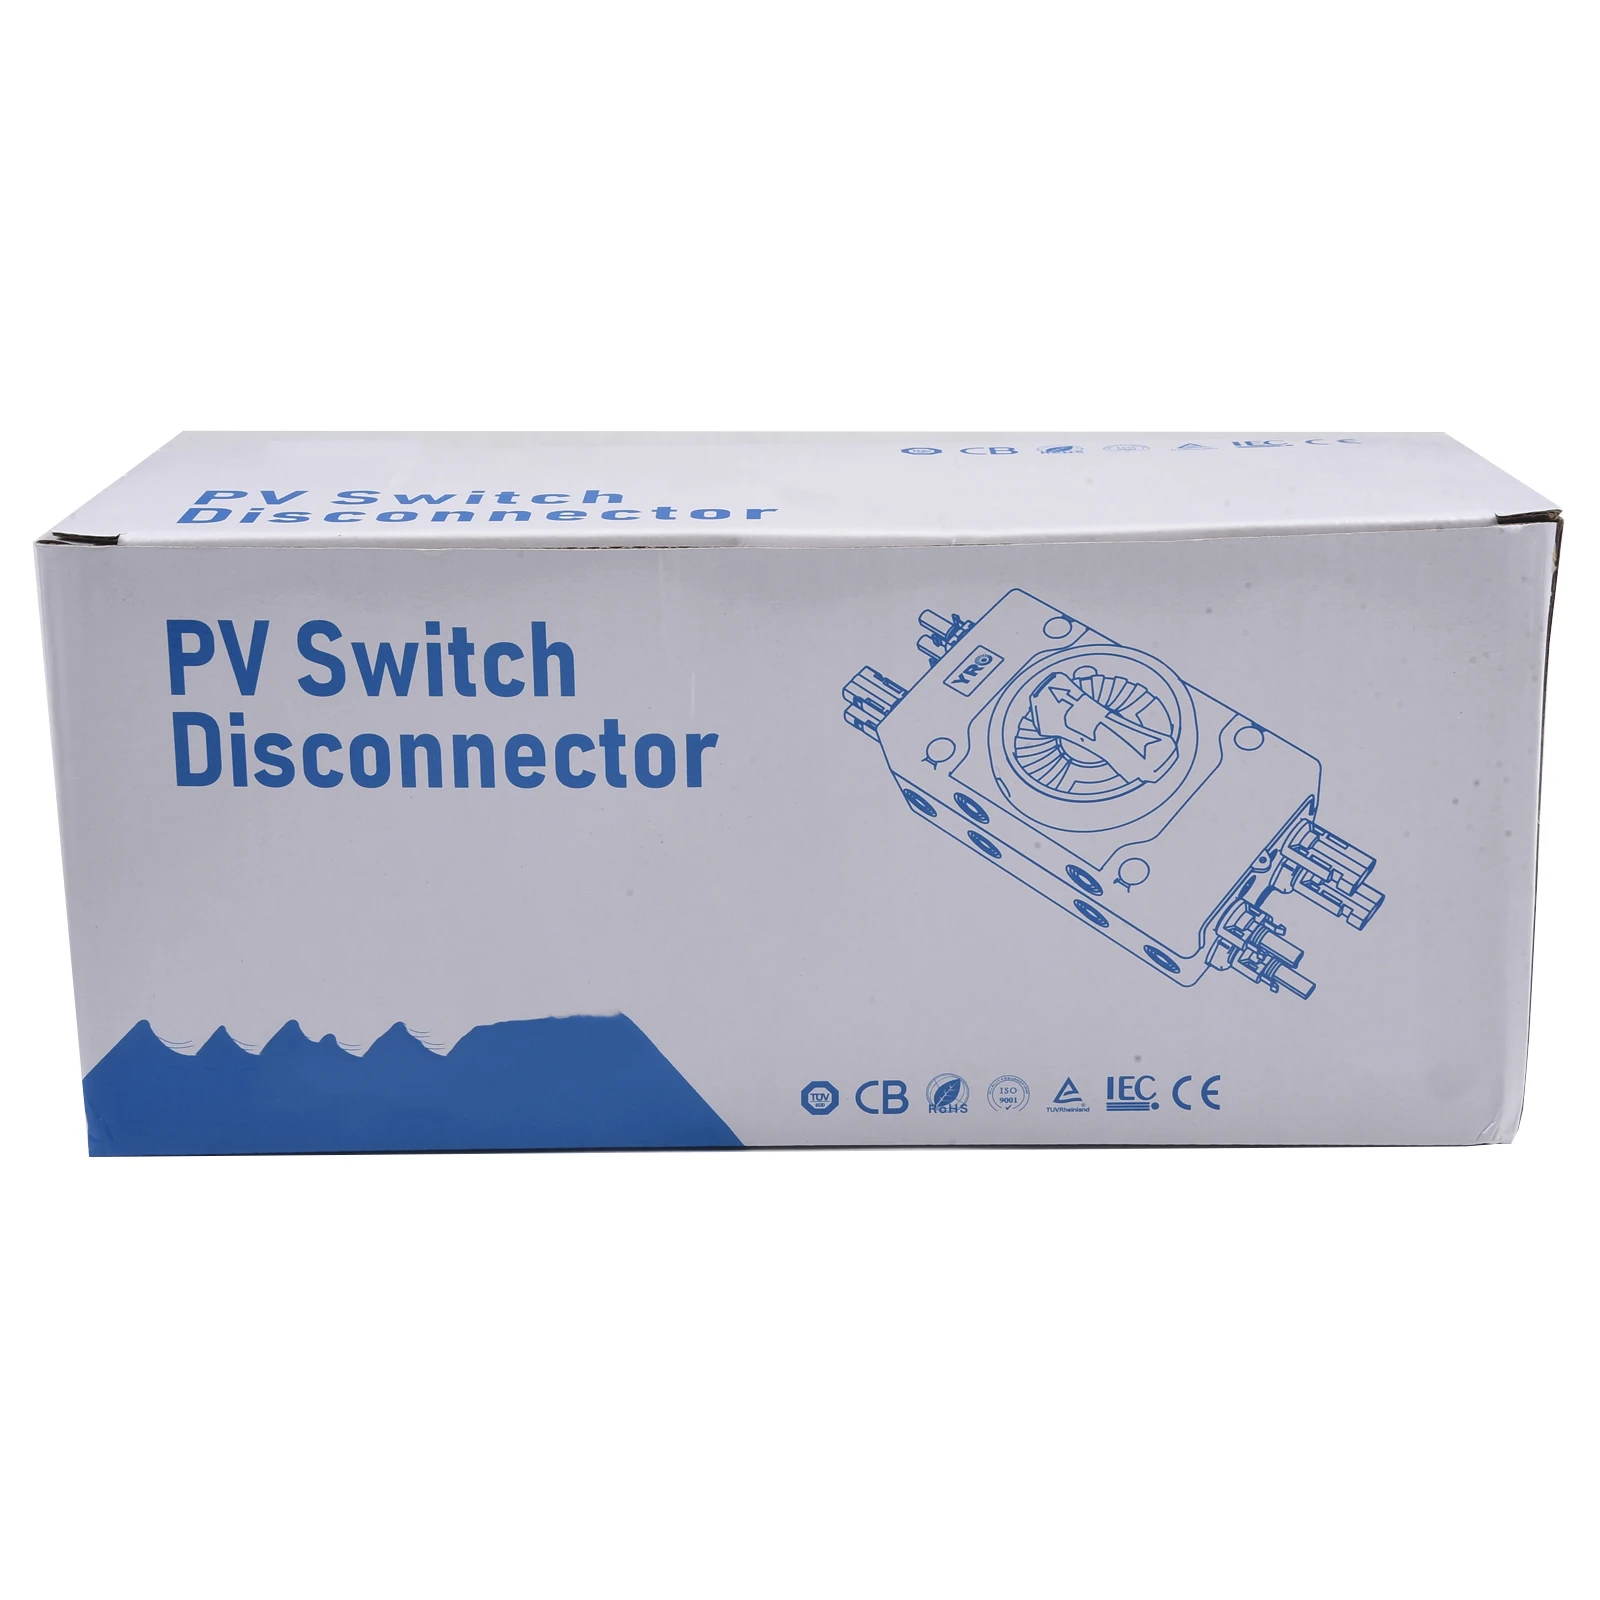 

PV DC Disconnect Switch 32A 1000VDC 4P IP66, Suitable for Solar Photovoltaic Systems and Other DC Applications